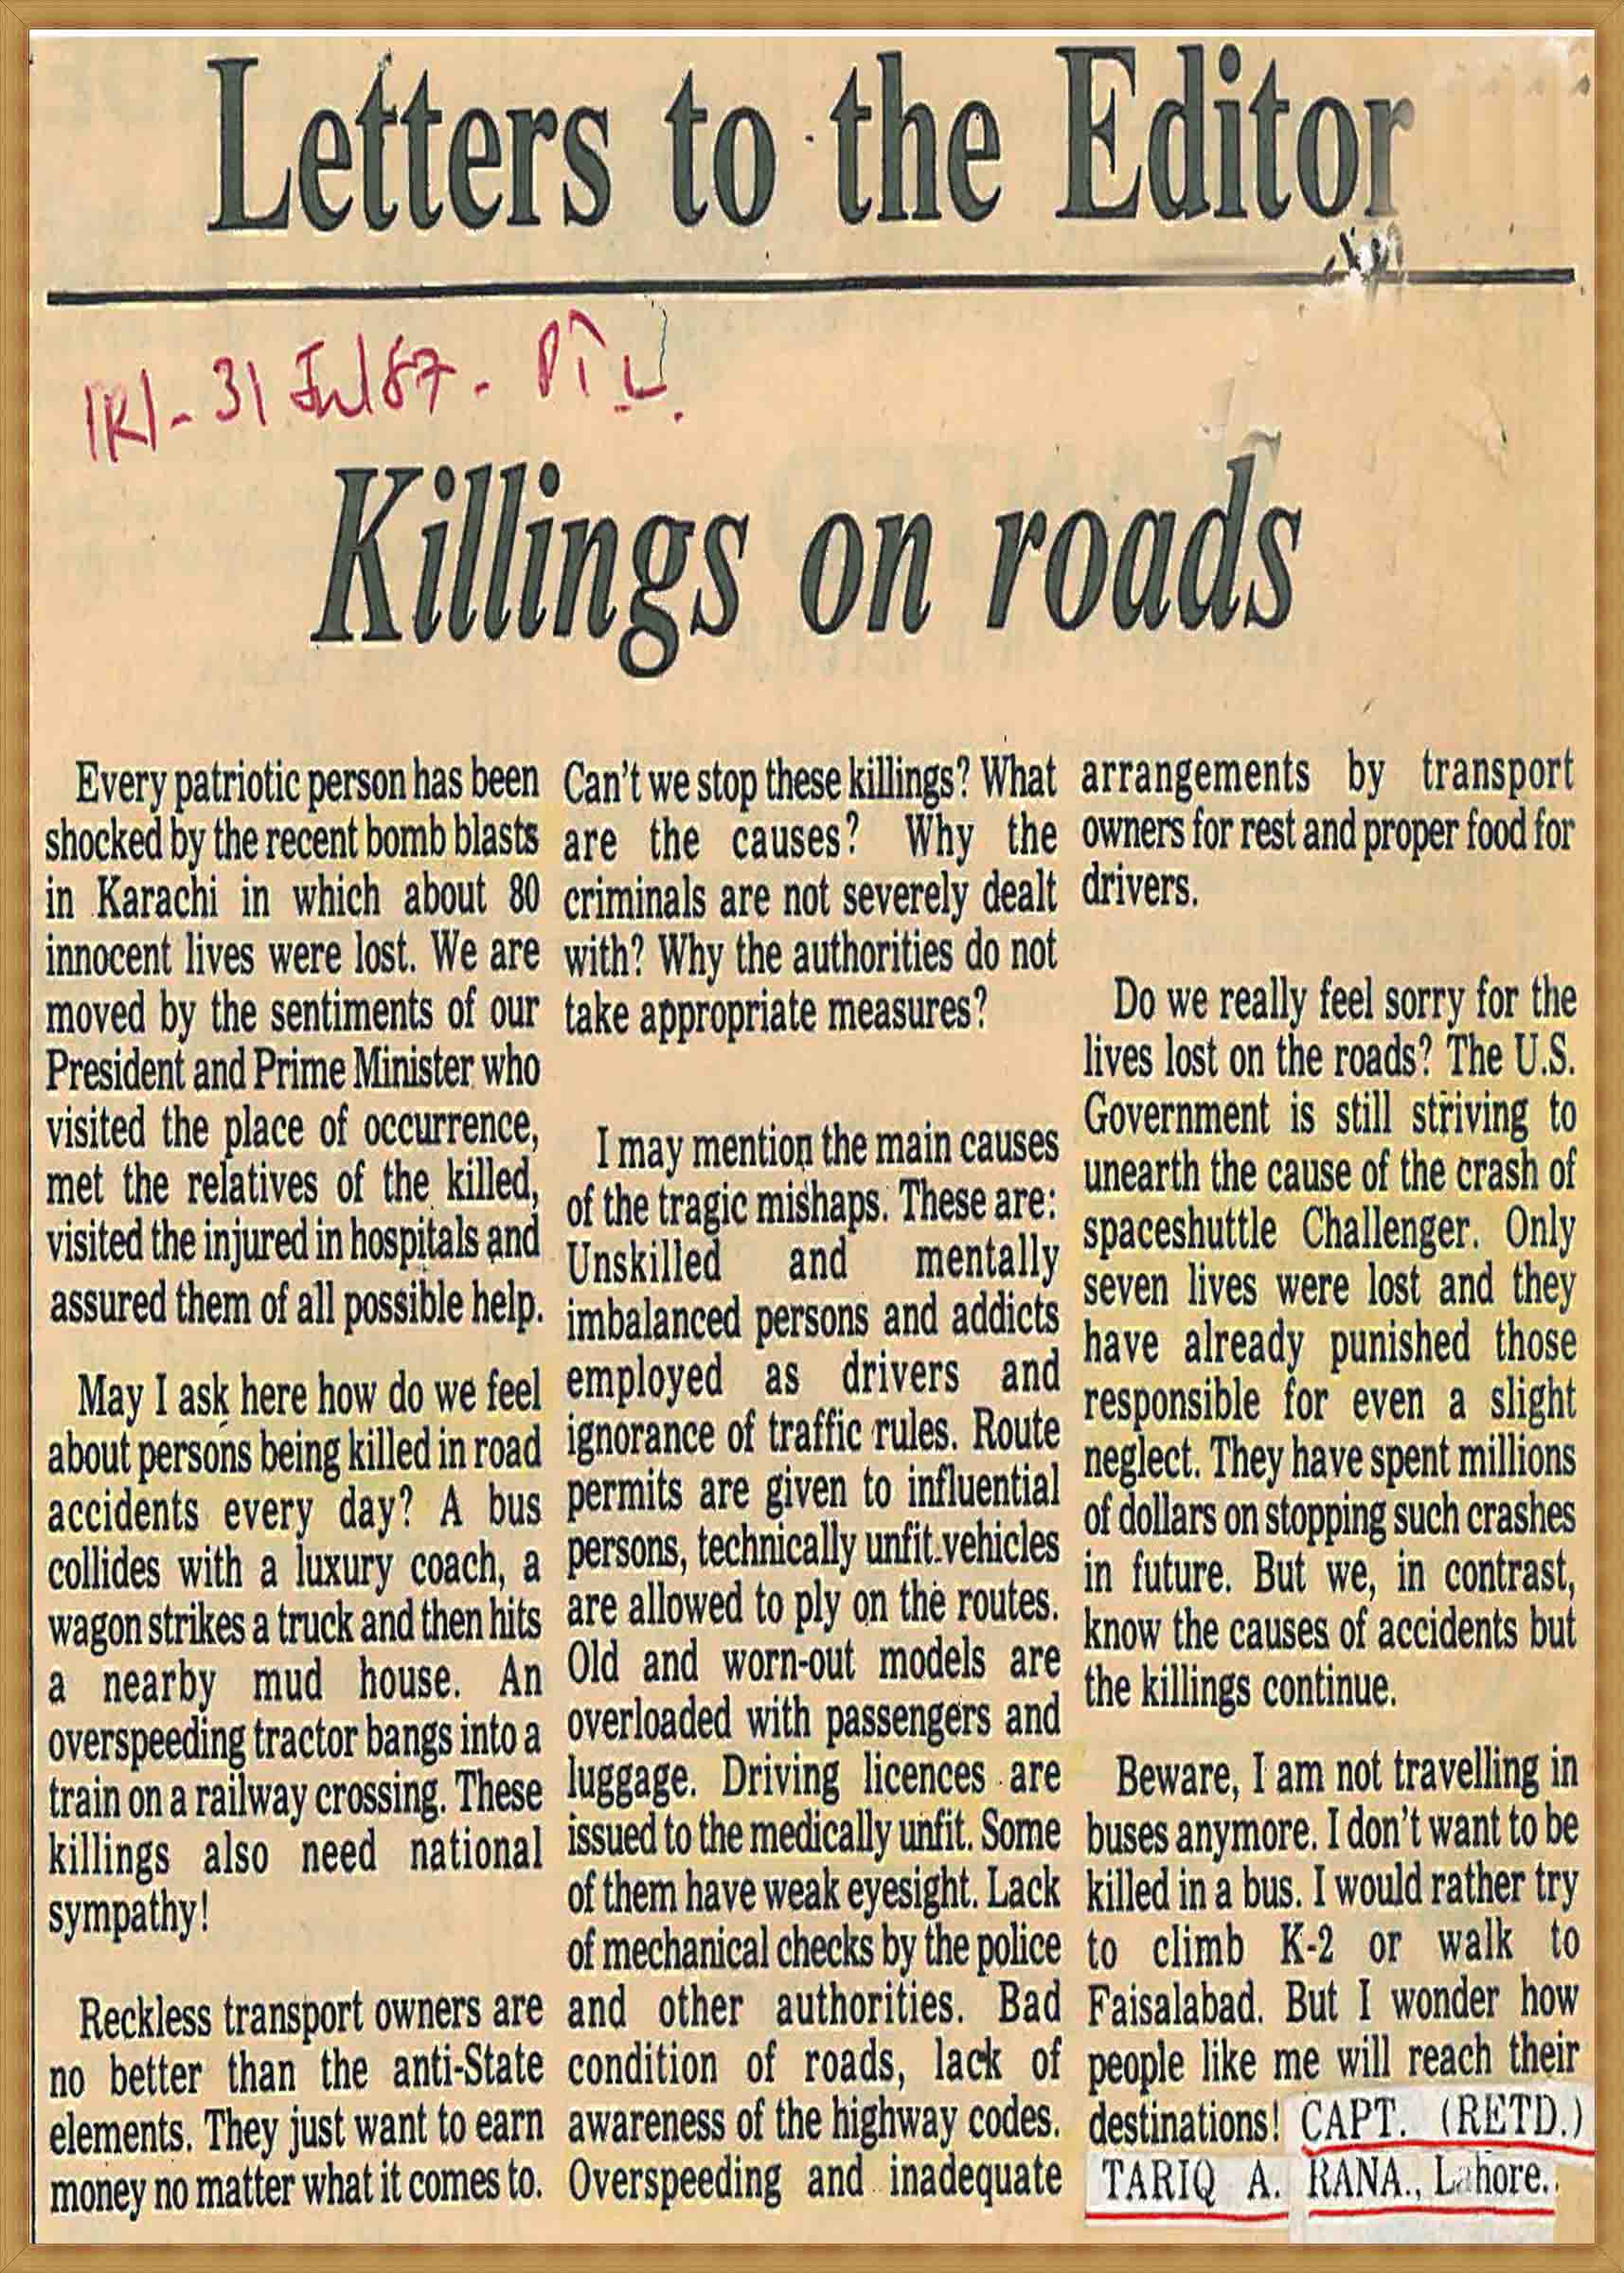 Letter to the Editor-Killings on roads (31-07-1987)